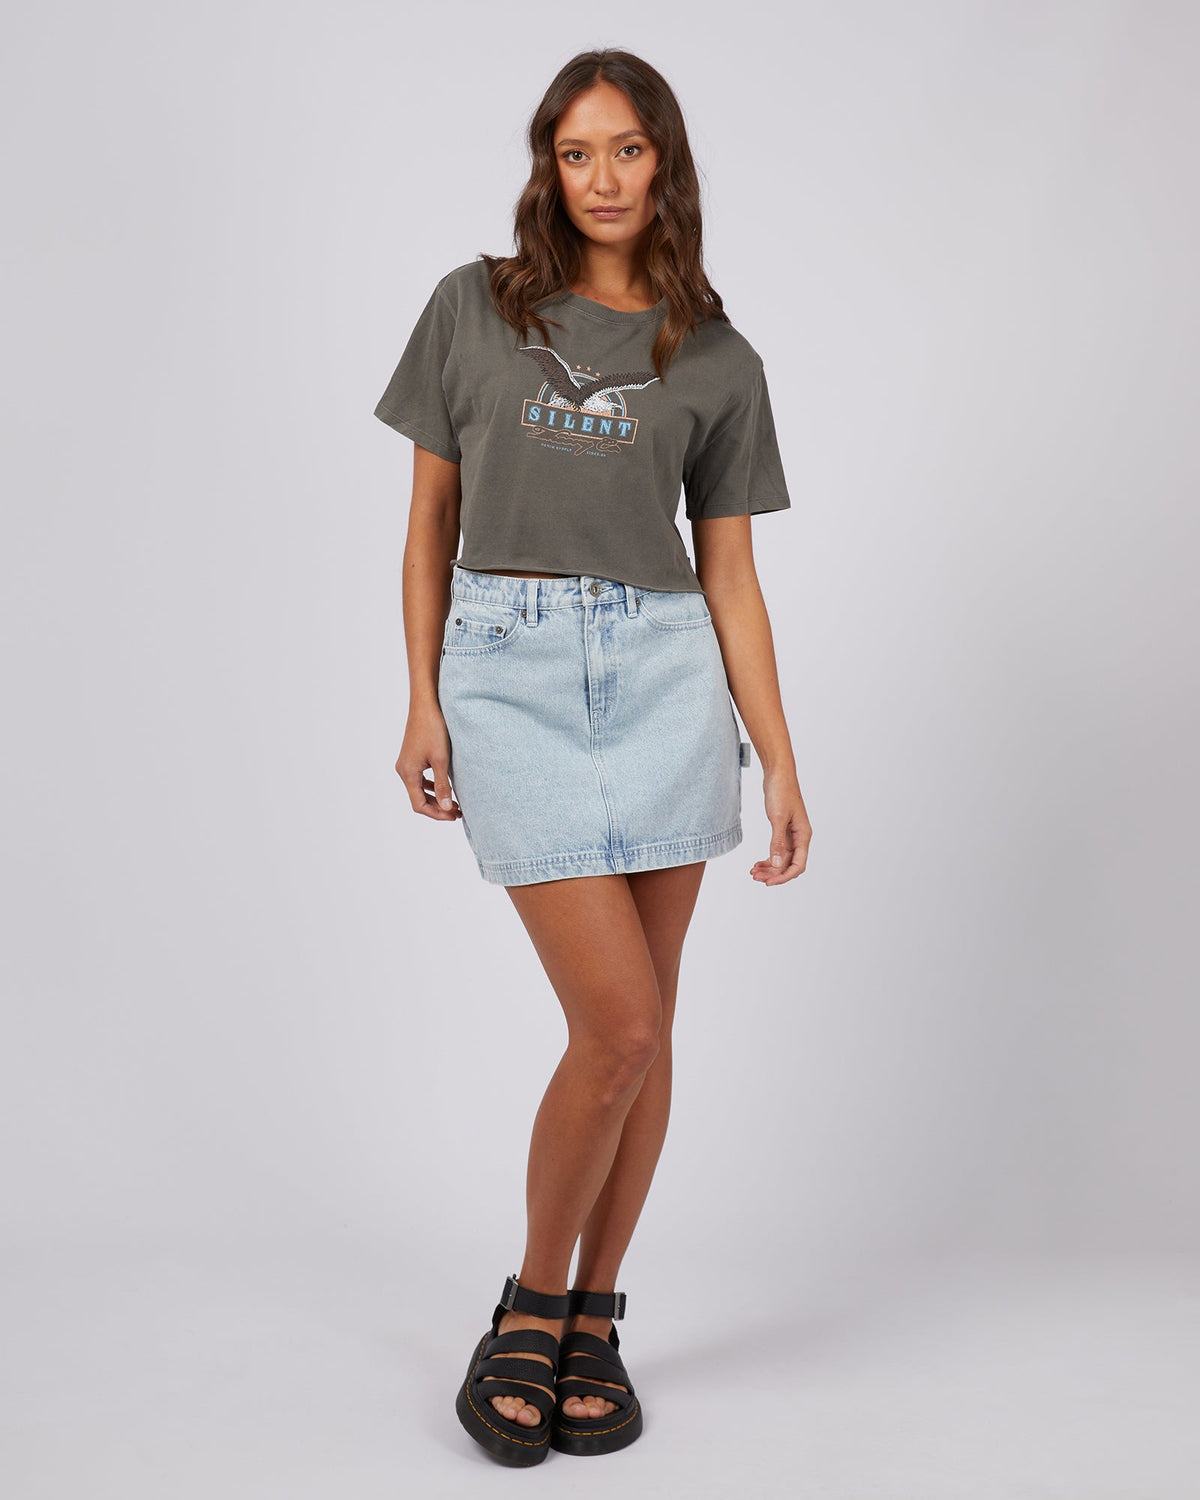 Silent Theory Ladies-Fallout Tee Coal-Edge Clothing